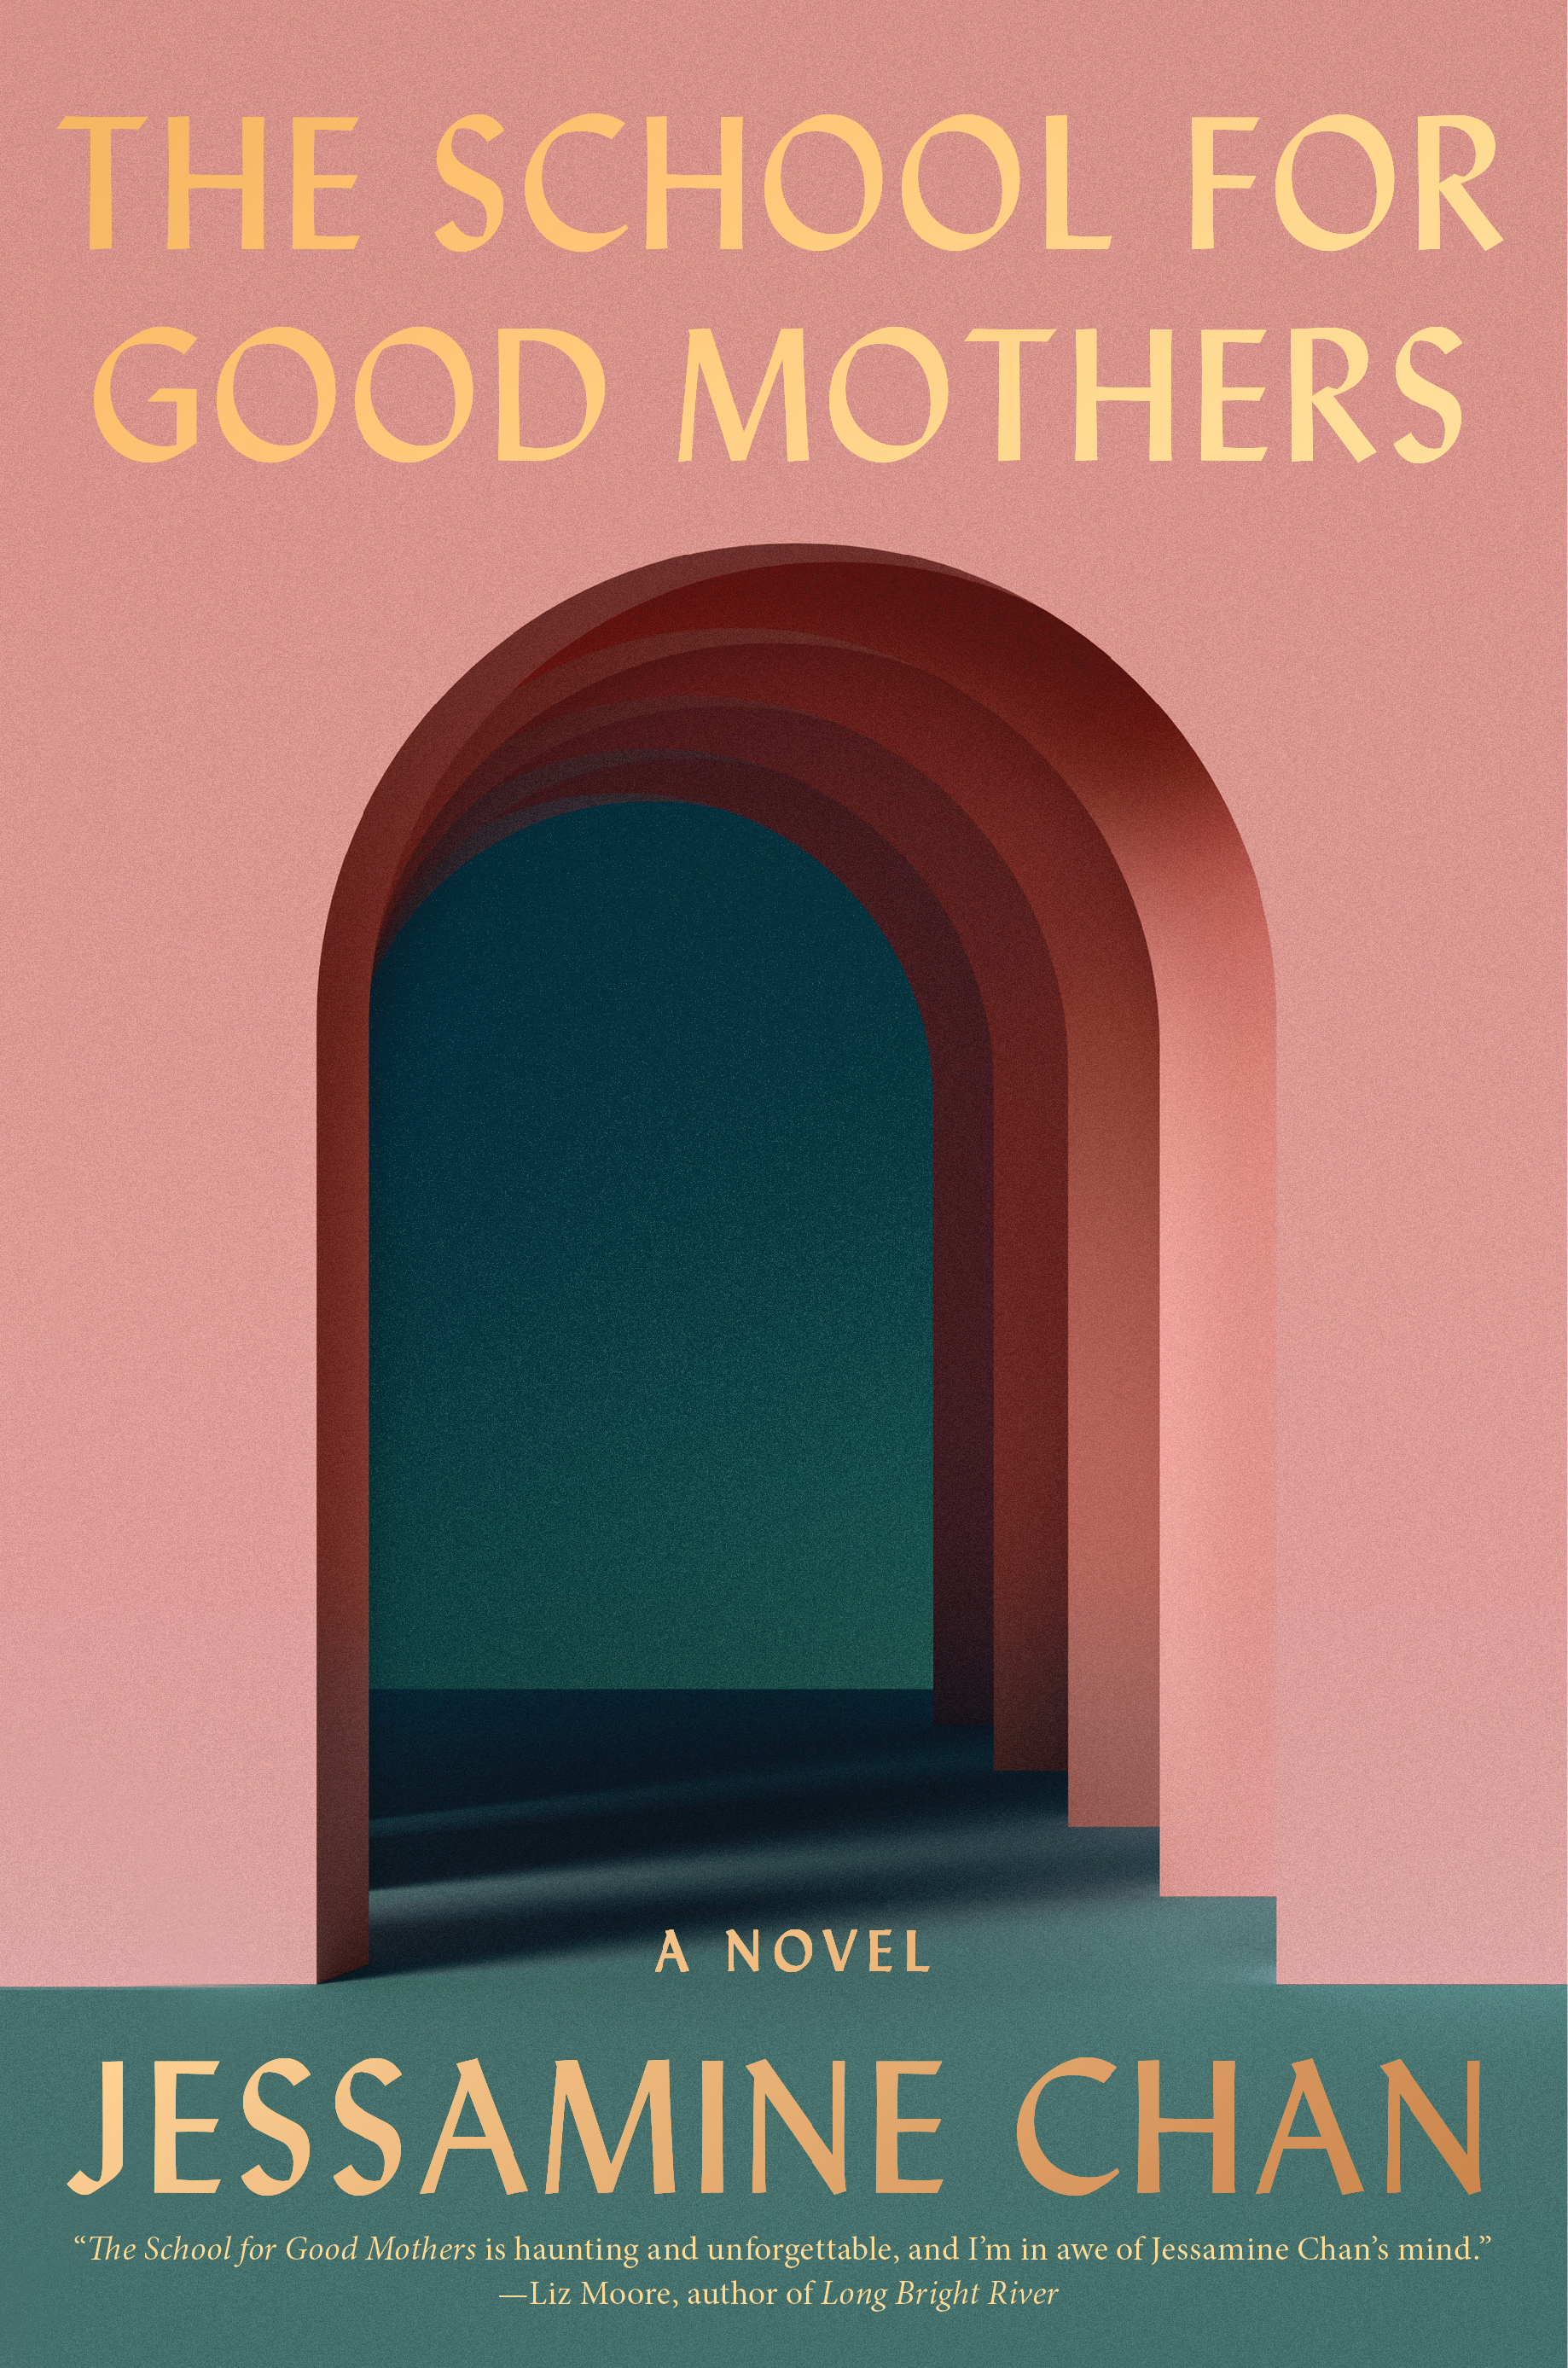 The cover of School for Good Mothers. A series of pink archways form a corridor with a teal shape at the end.